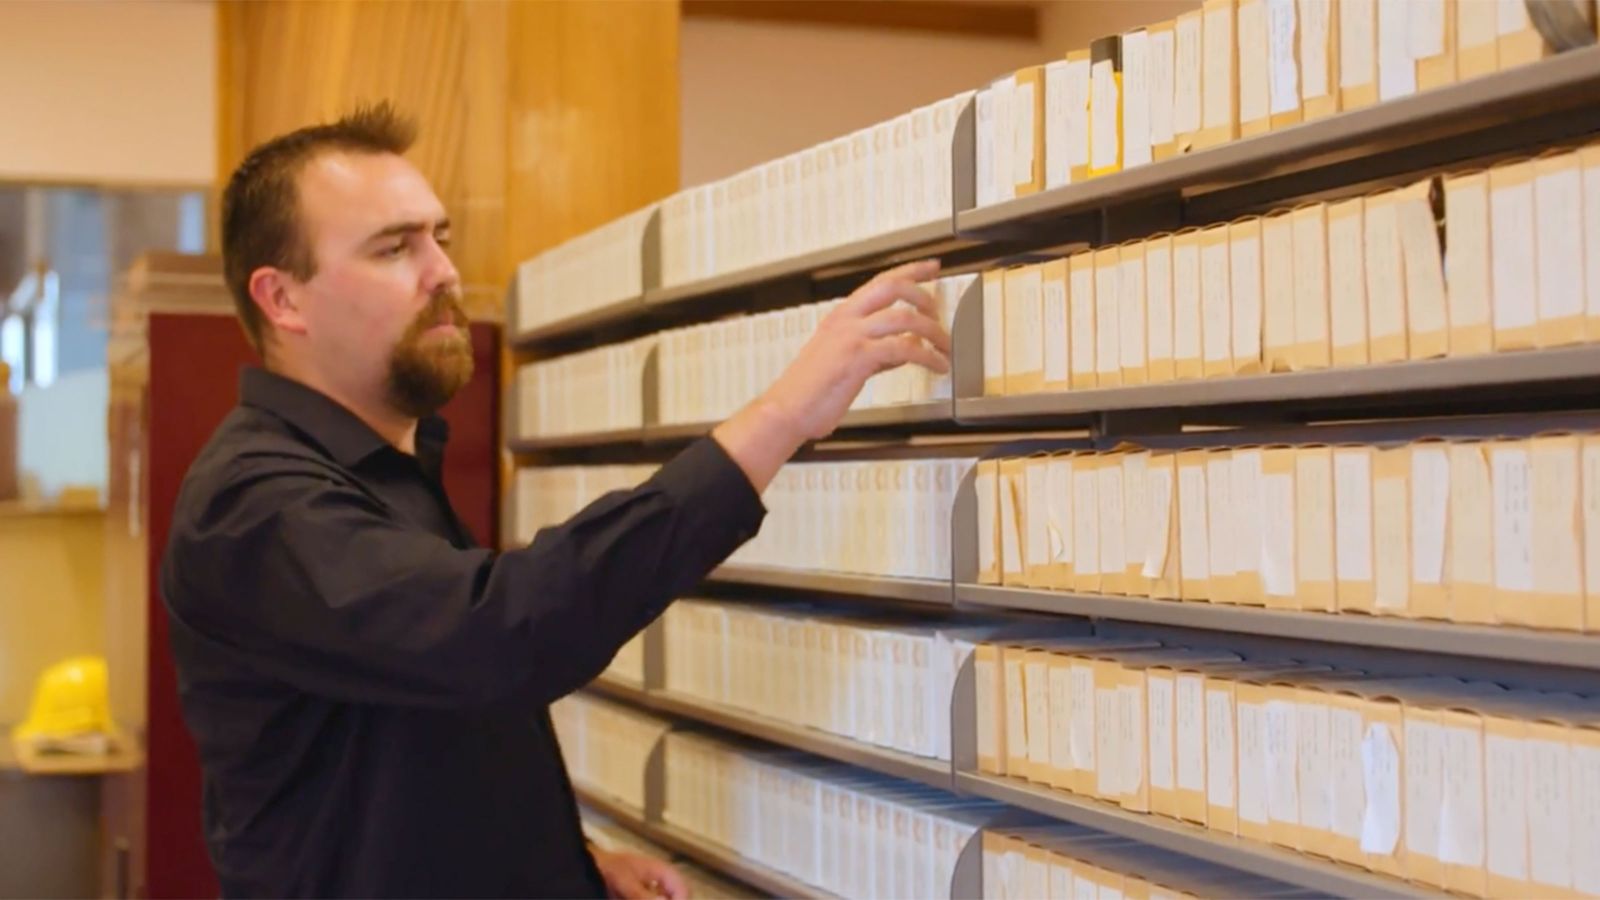 A man selects a small case from shelves of contianing the same sized cases in an archive.